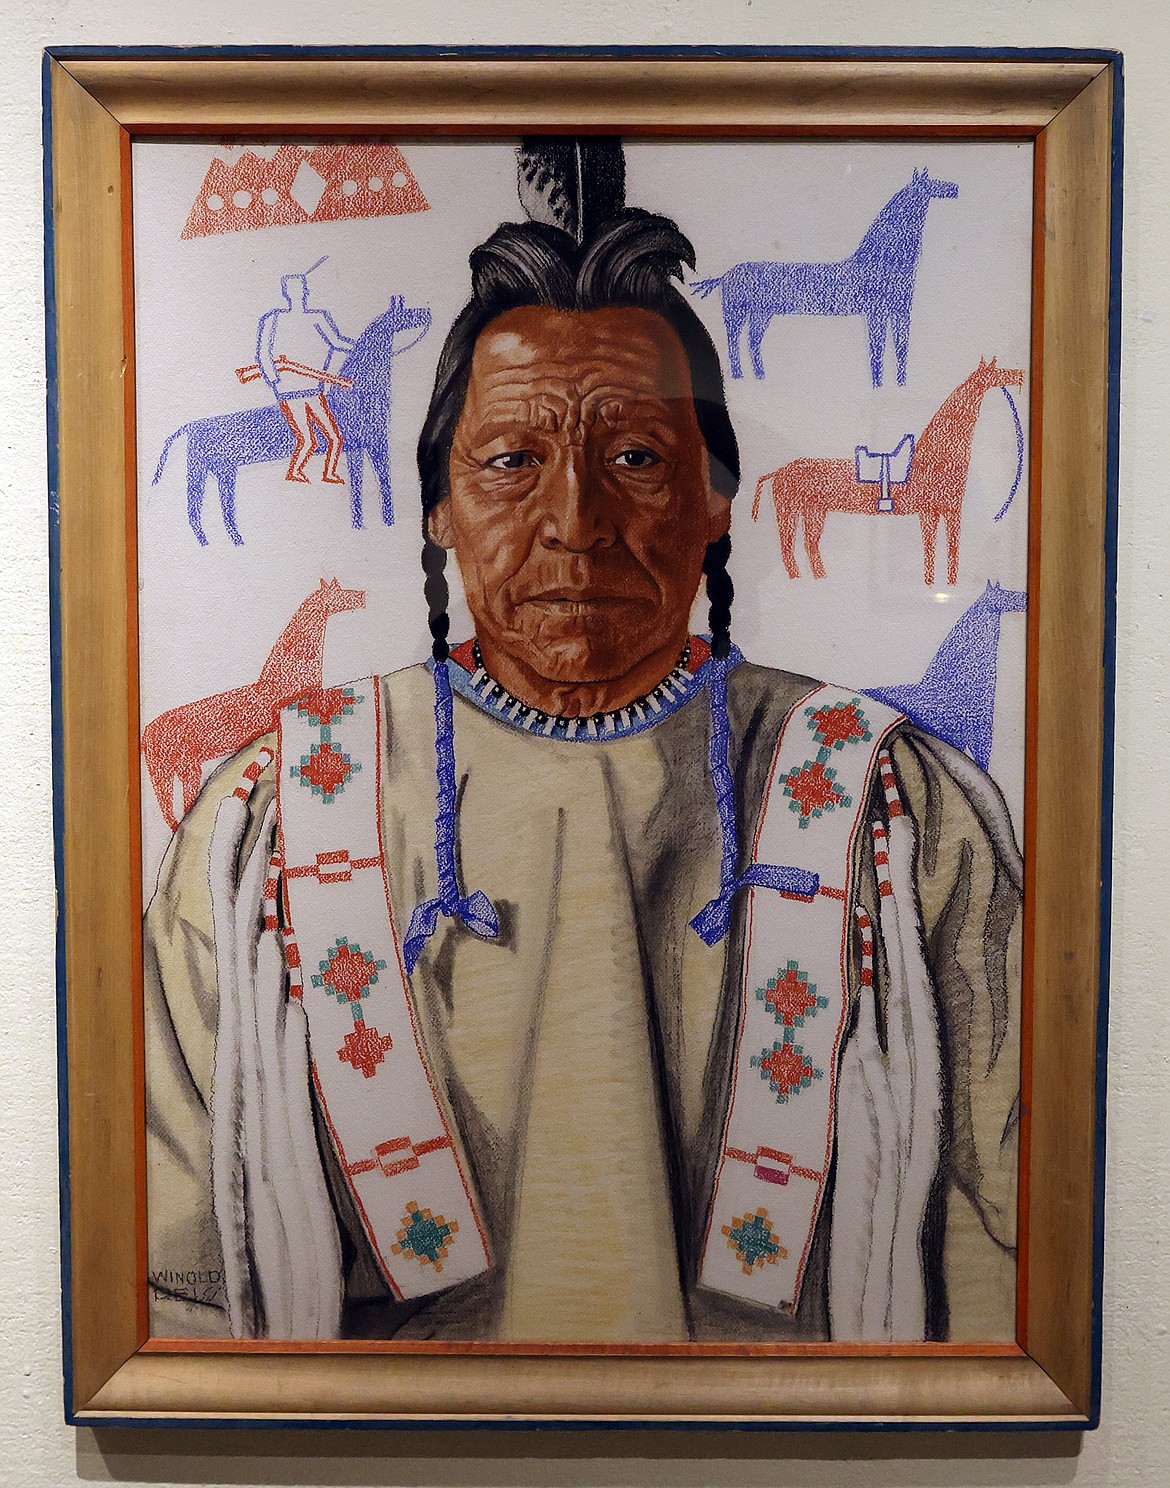 A portrait of John Two Guns White Calf hangs as part of the “Connections – the Blackfeet and Winold Reiss” exhibit at the Museum of the Plains Indian in Browning. (Jeremy Weber/Daily Inter Lake)